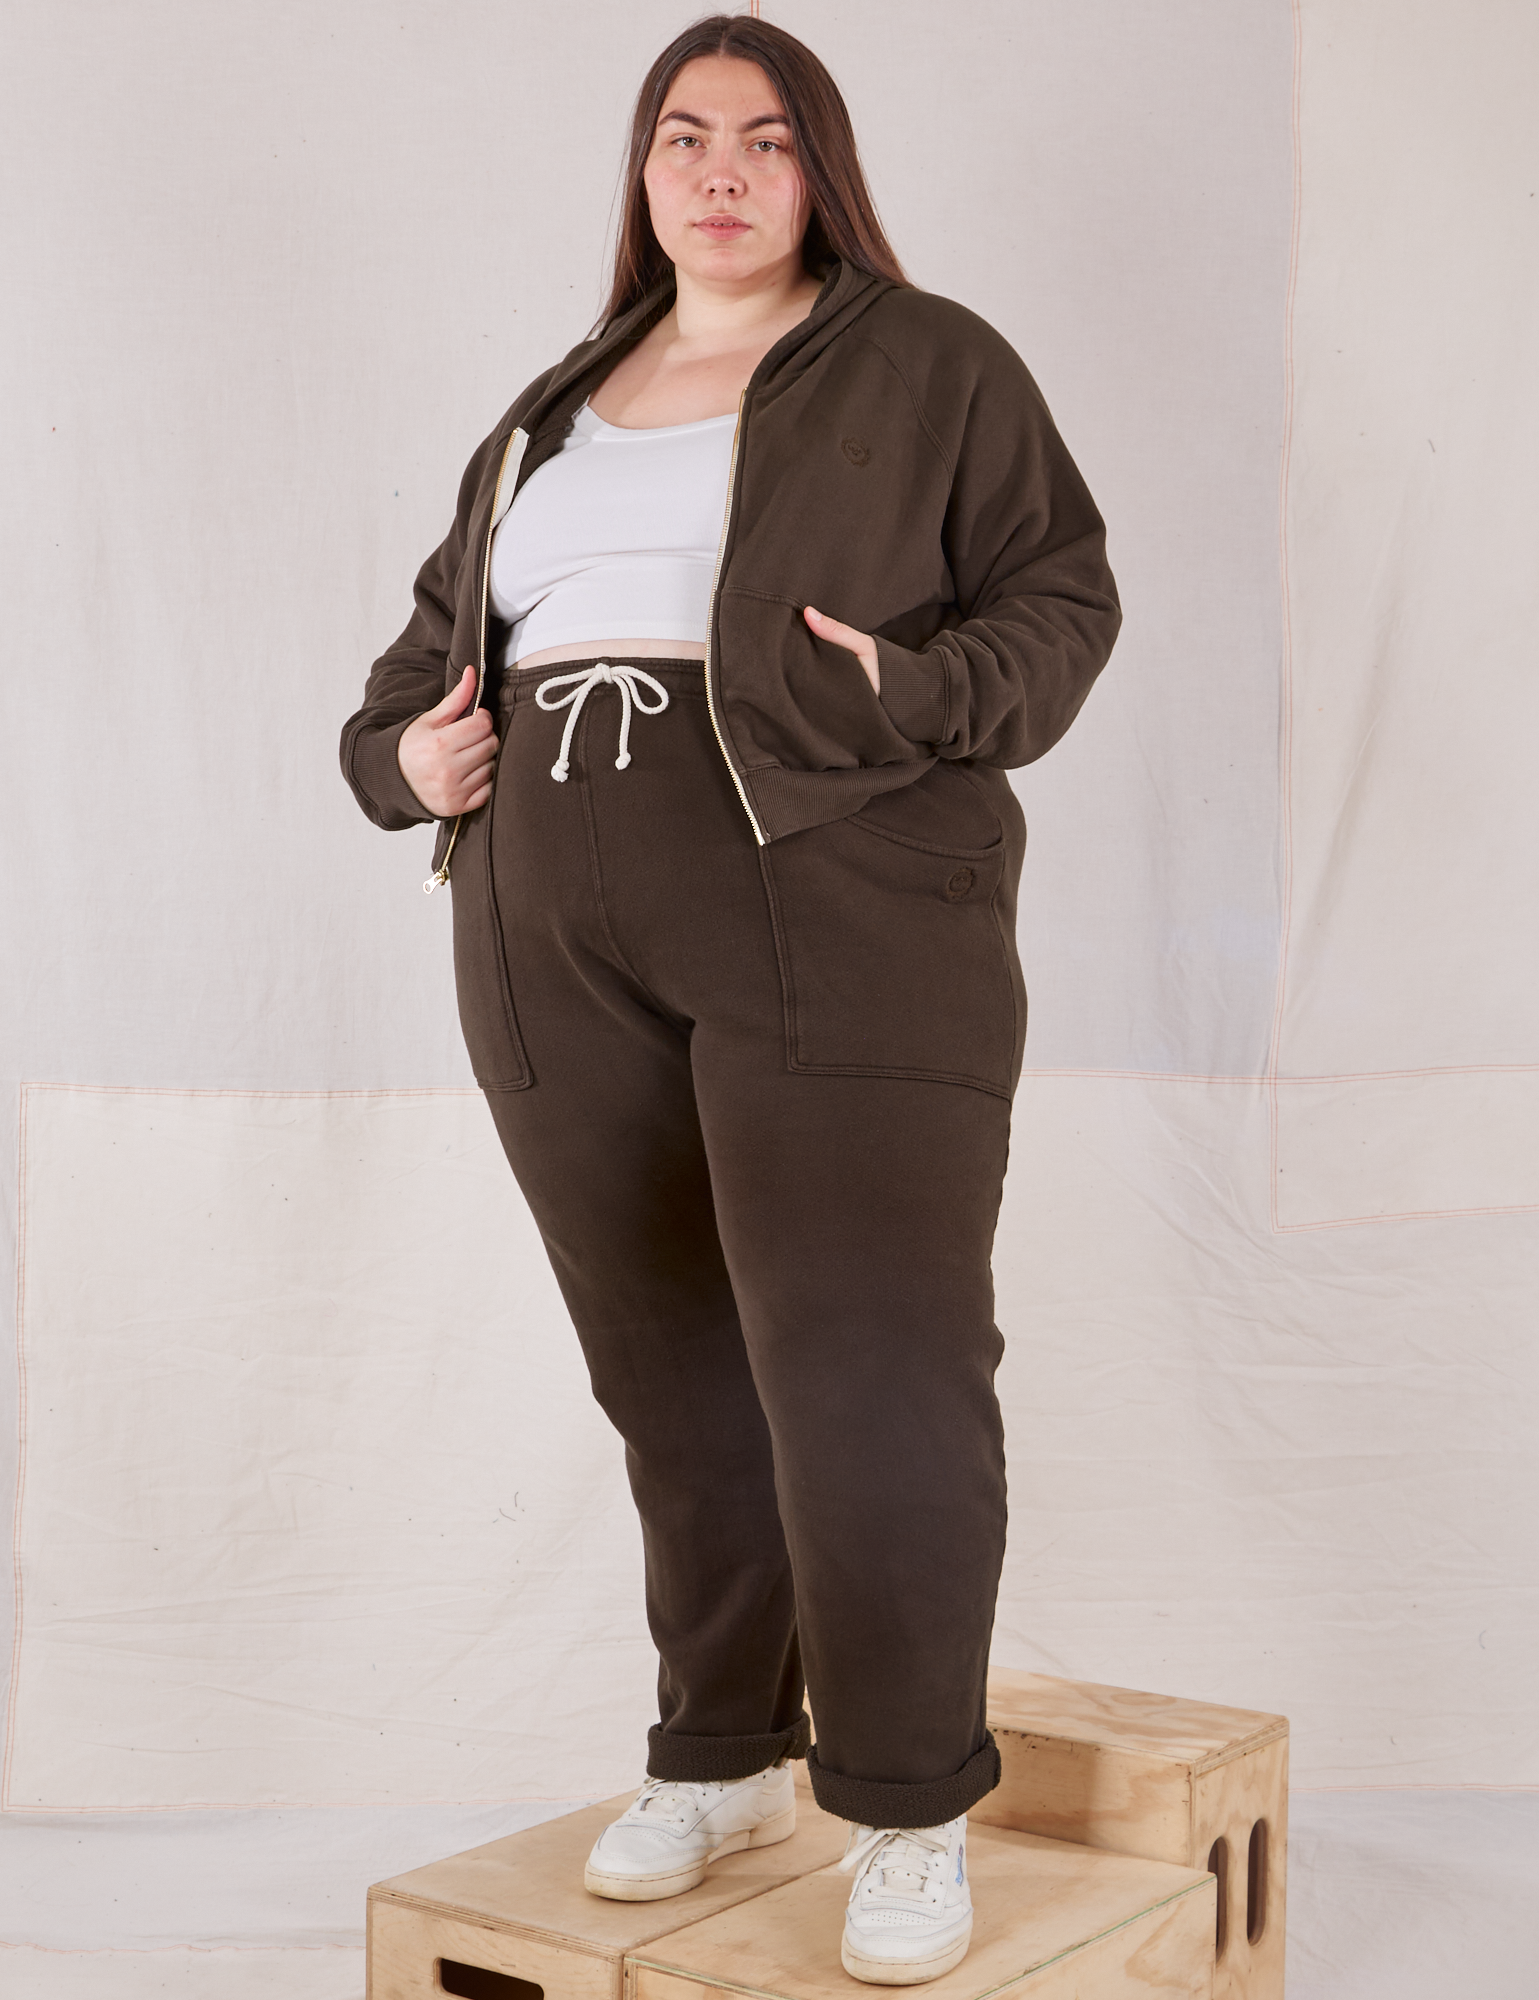 Marielena is 5&#39;8&quot; and wearing 1XL Rolled Cuff Sweat Pants in Espresso Brown with matching Cropped Zip Hoodie and a Cropped Tank in vintage tee off-white underneath.